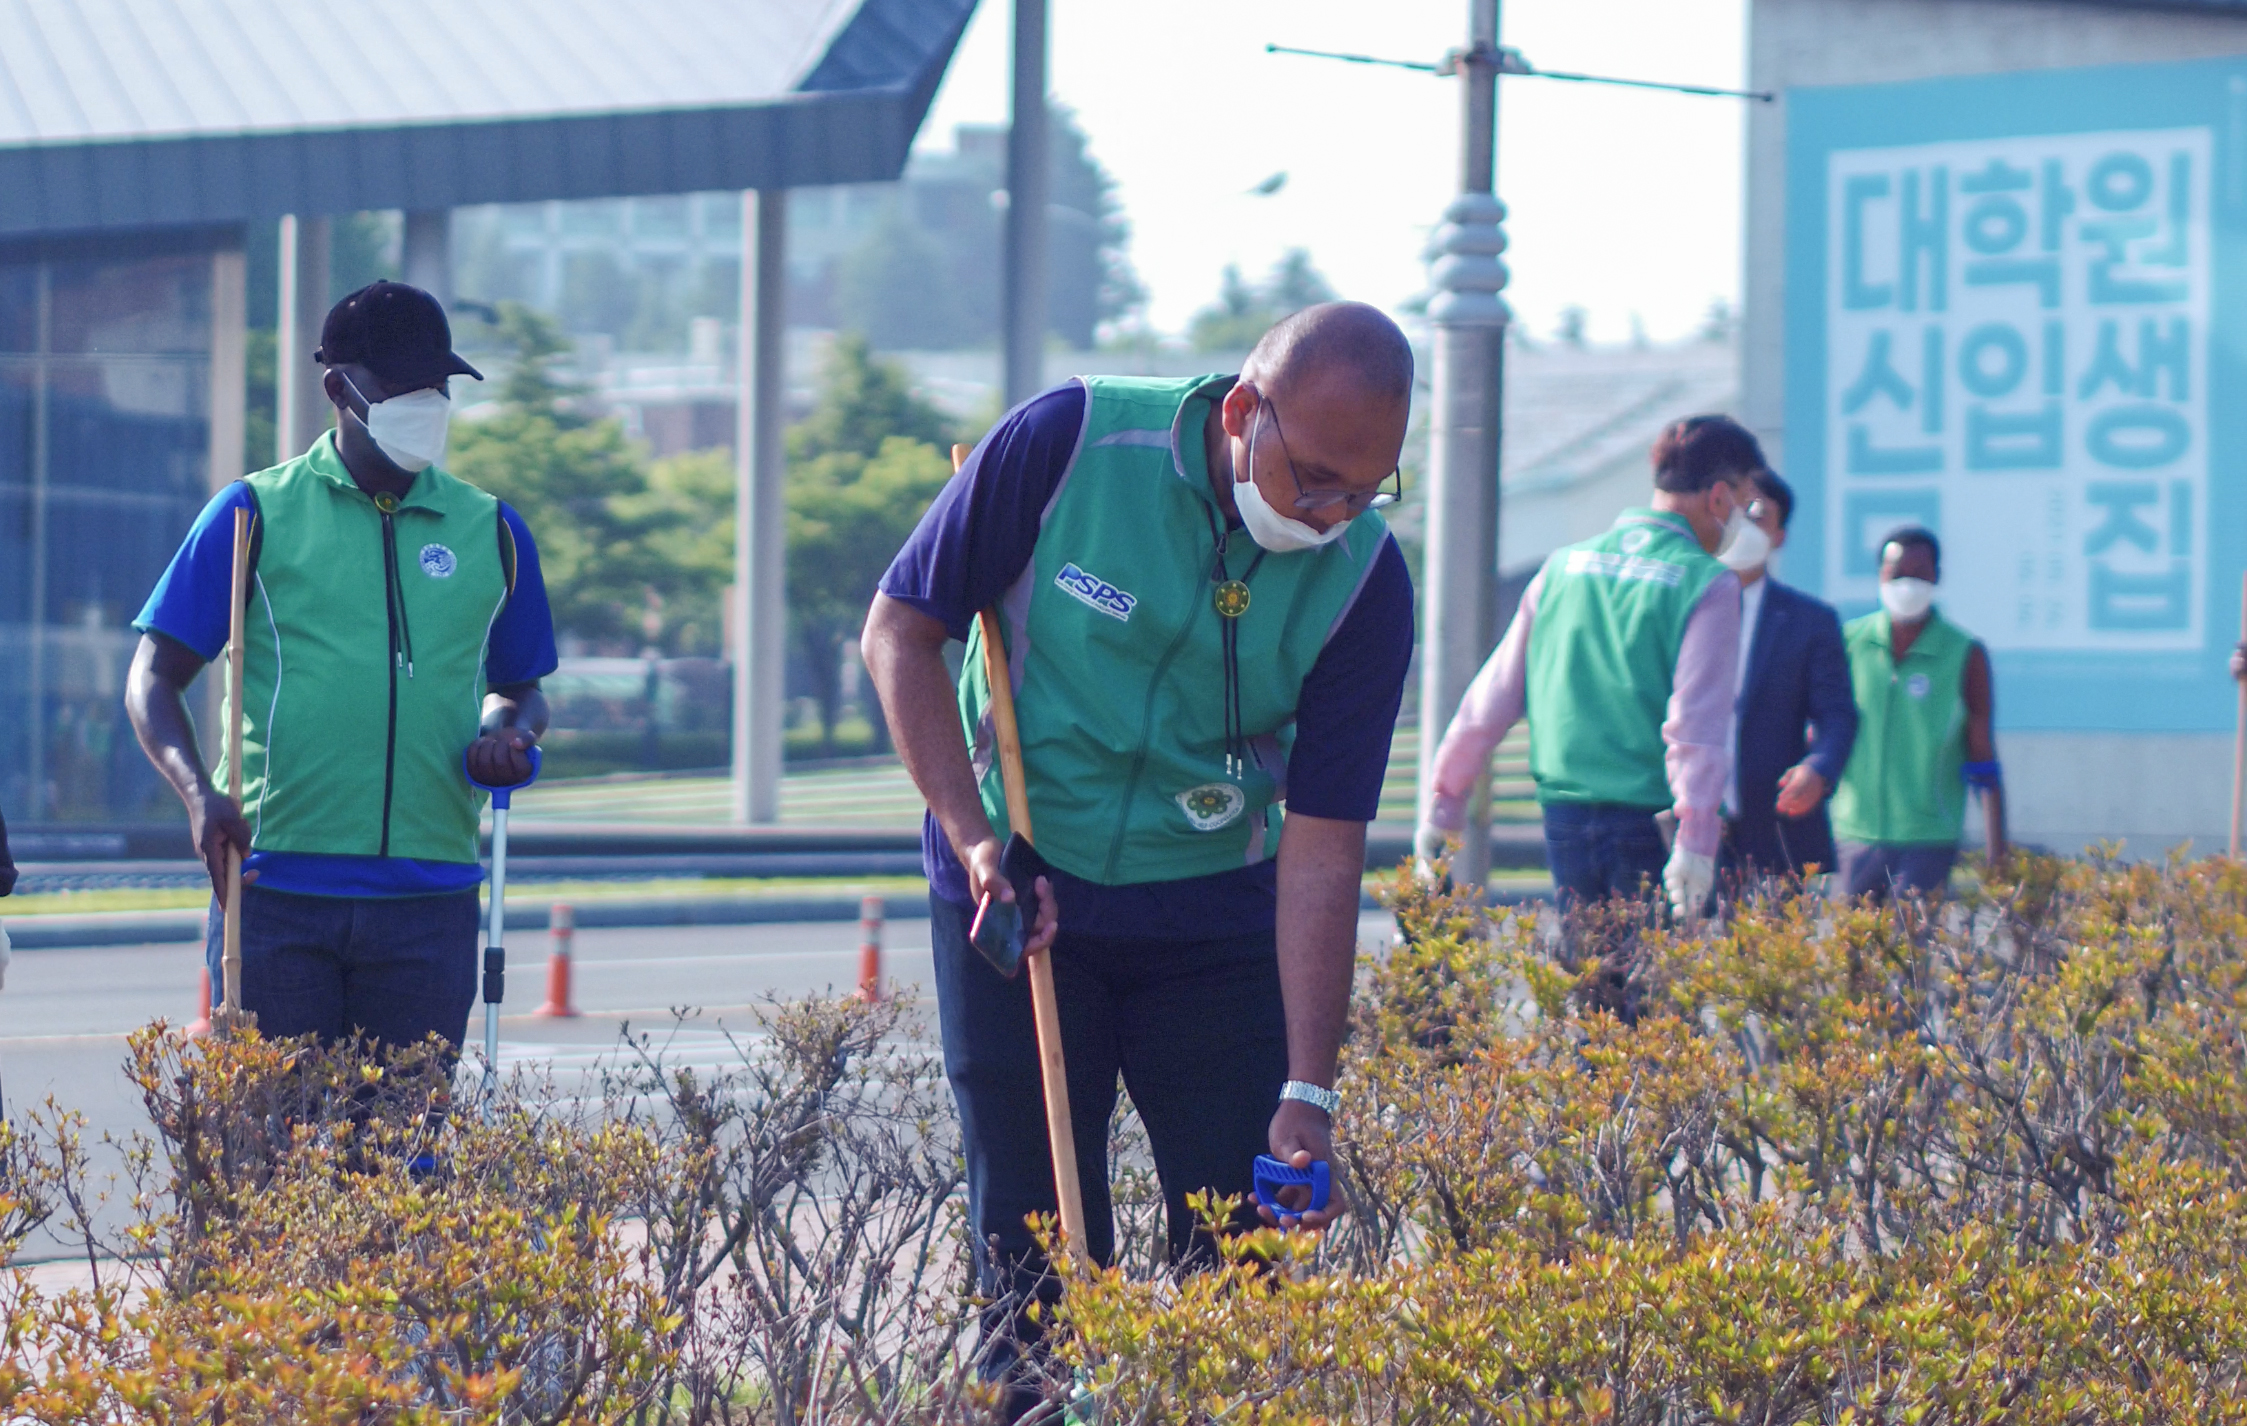 2021 Saemaul spirit morning cleaning event